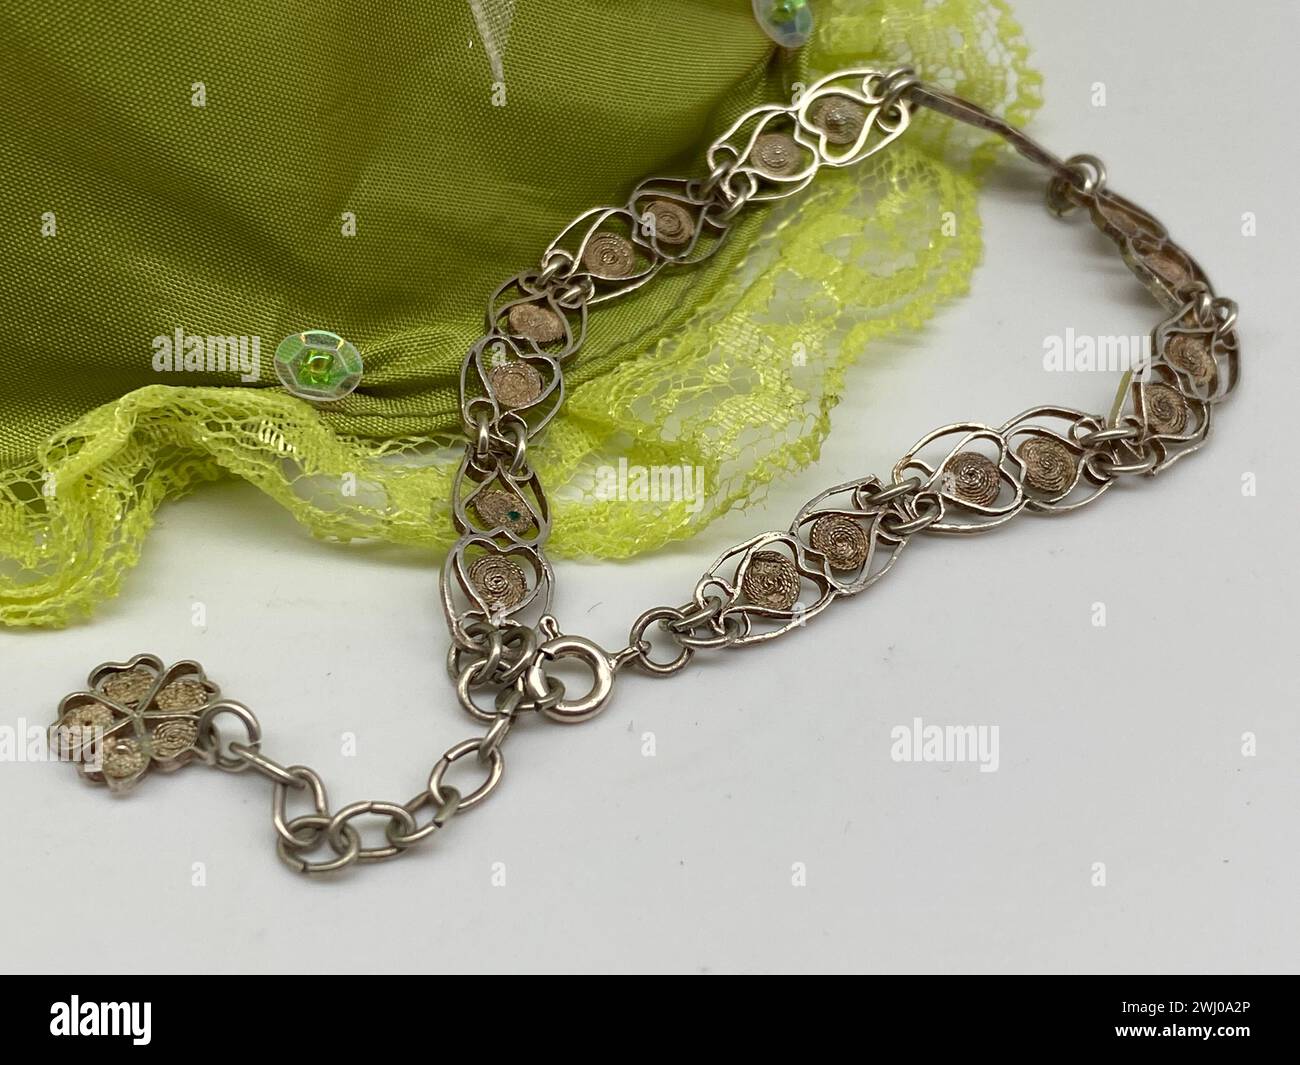 Silver chain with brass charms and glasses on green lace Stock Photo